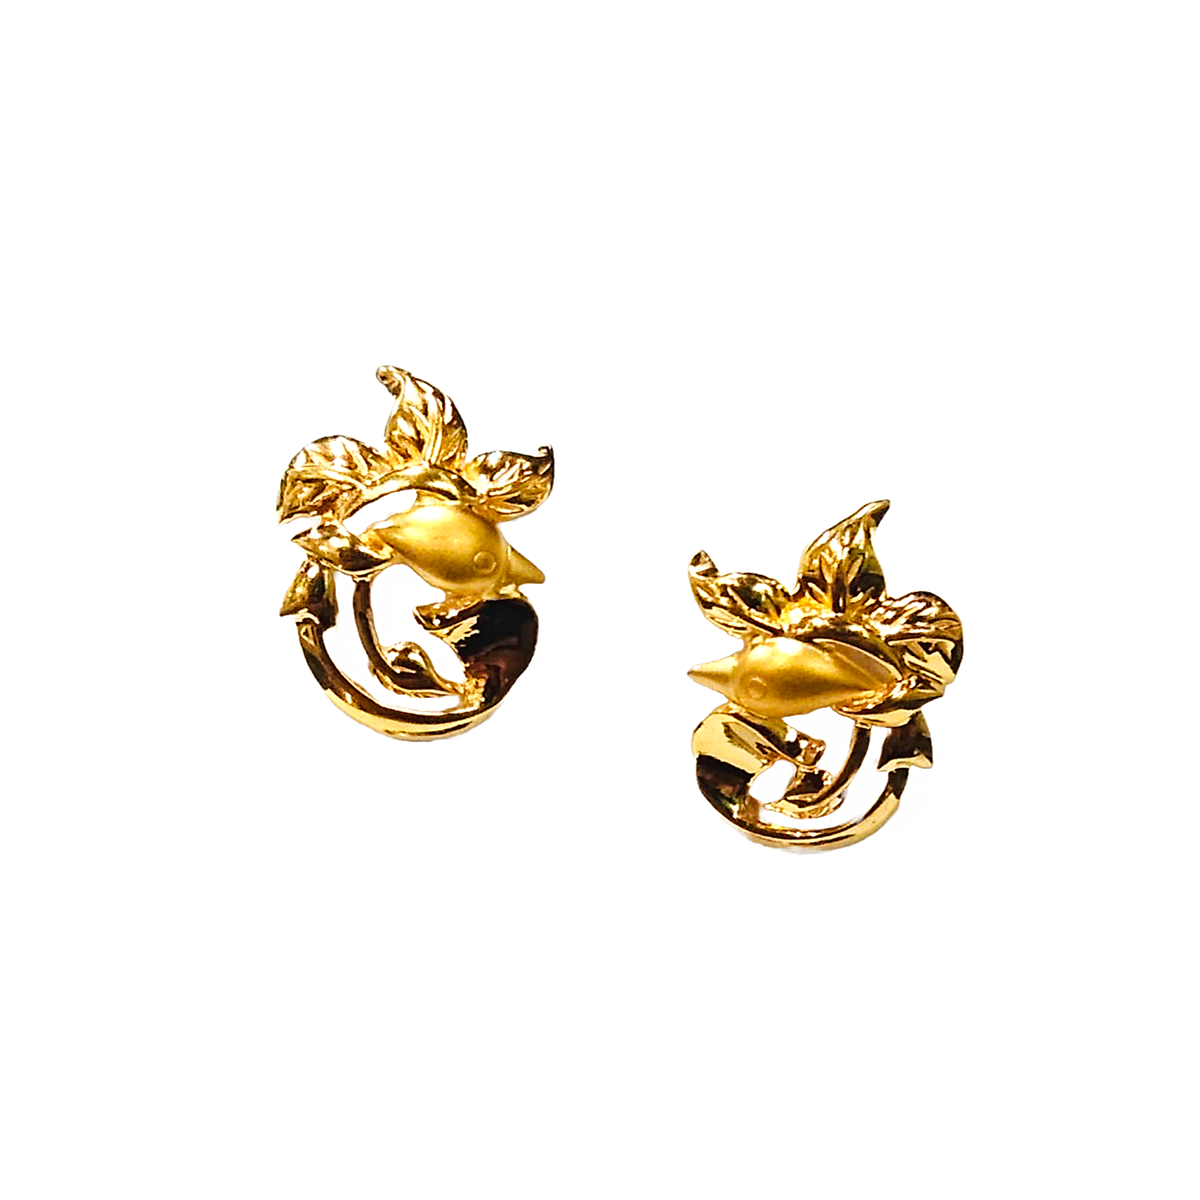 The Brilliance gold earrings